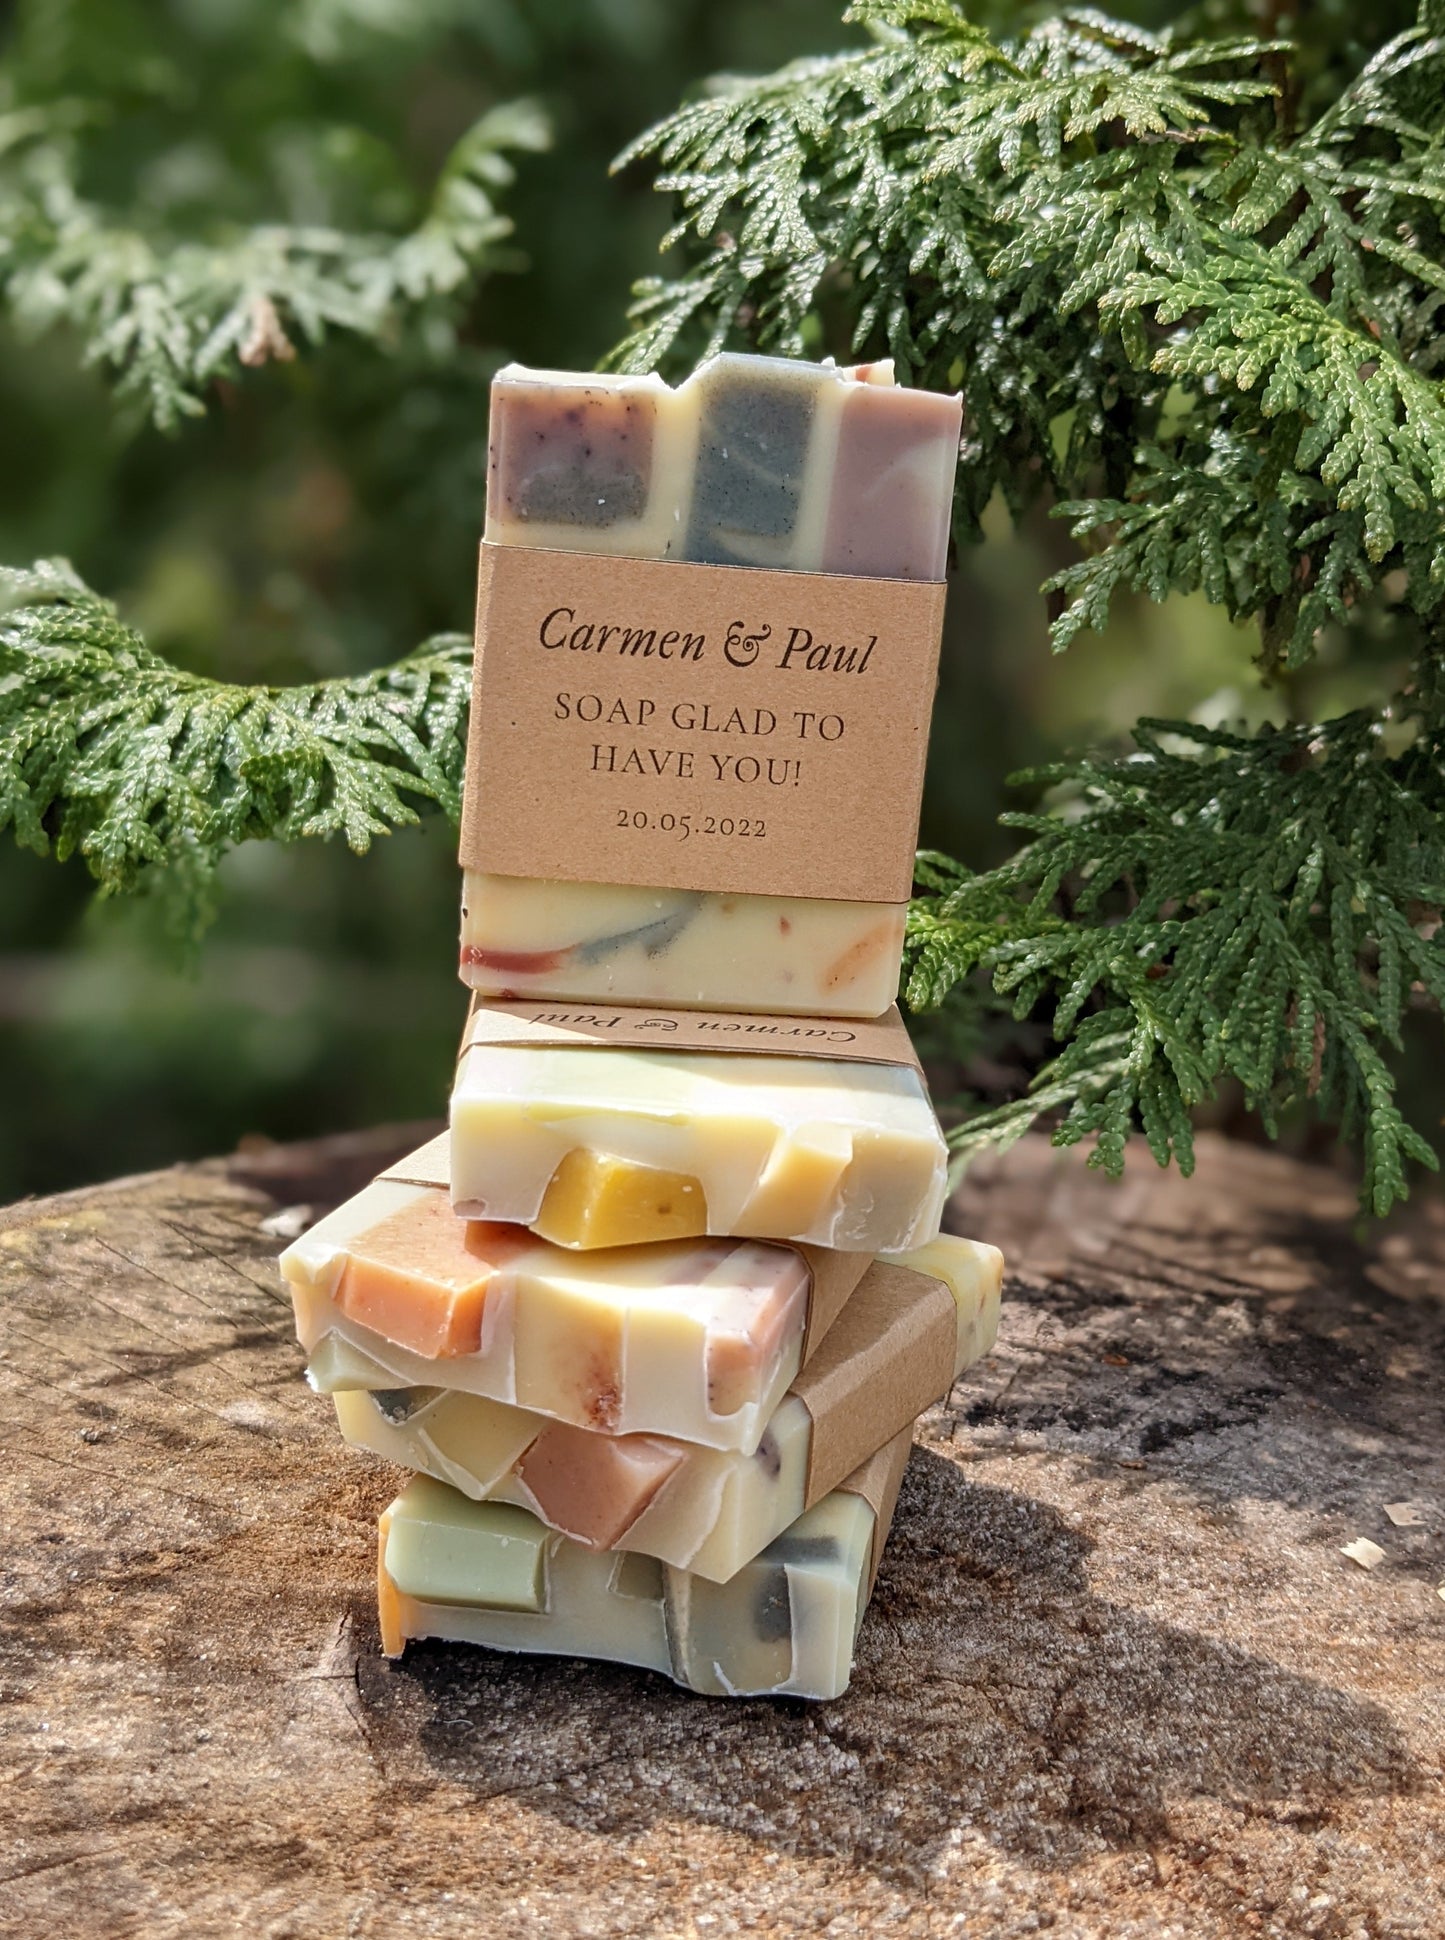 Set of 20 - Mini (1 oz) Soap Favors for Weddings, Showers, or Airbnb Guests